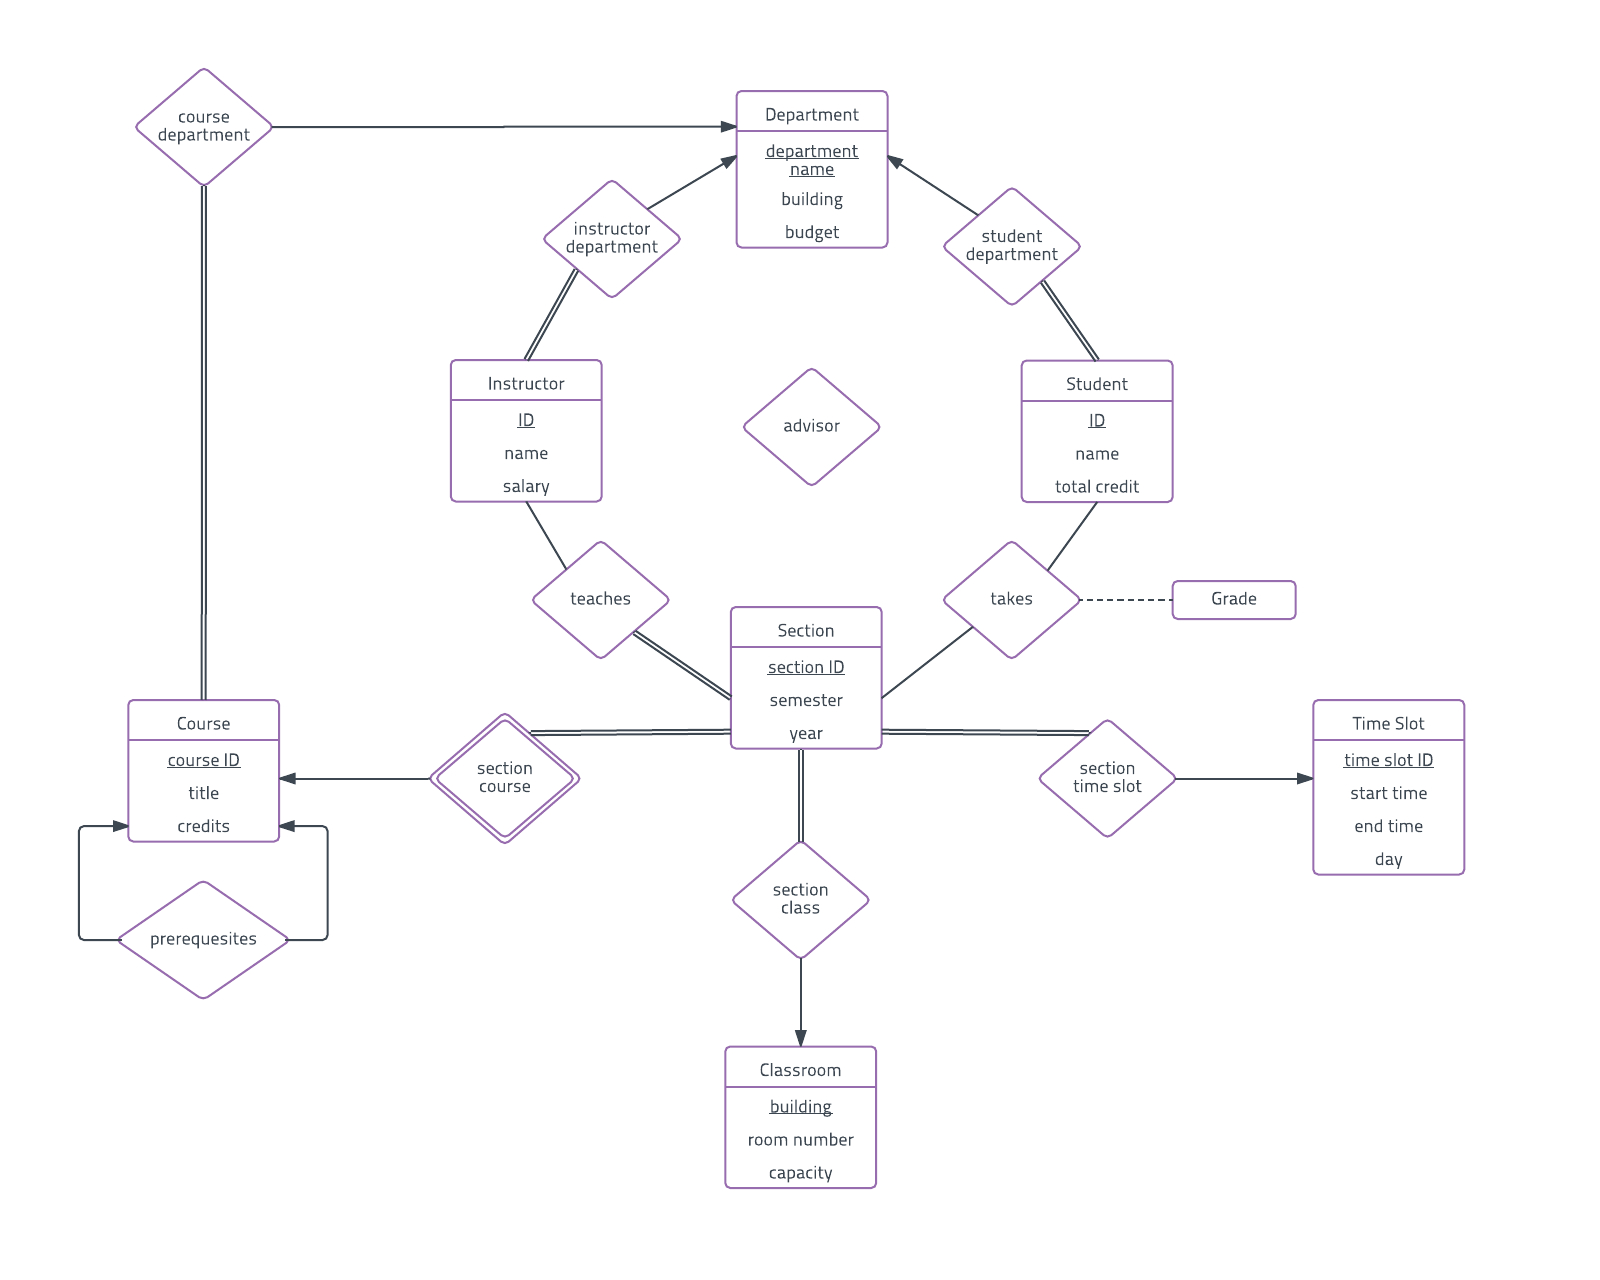 Er Diagram Examples And Templates | Lucidchart throughout Er Diagram Questions